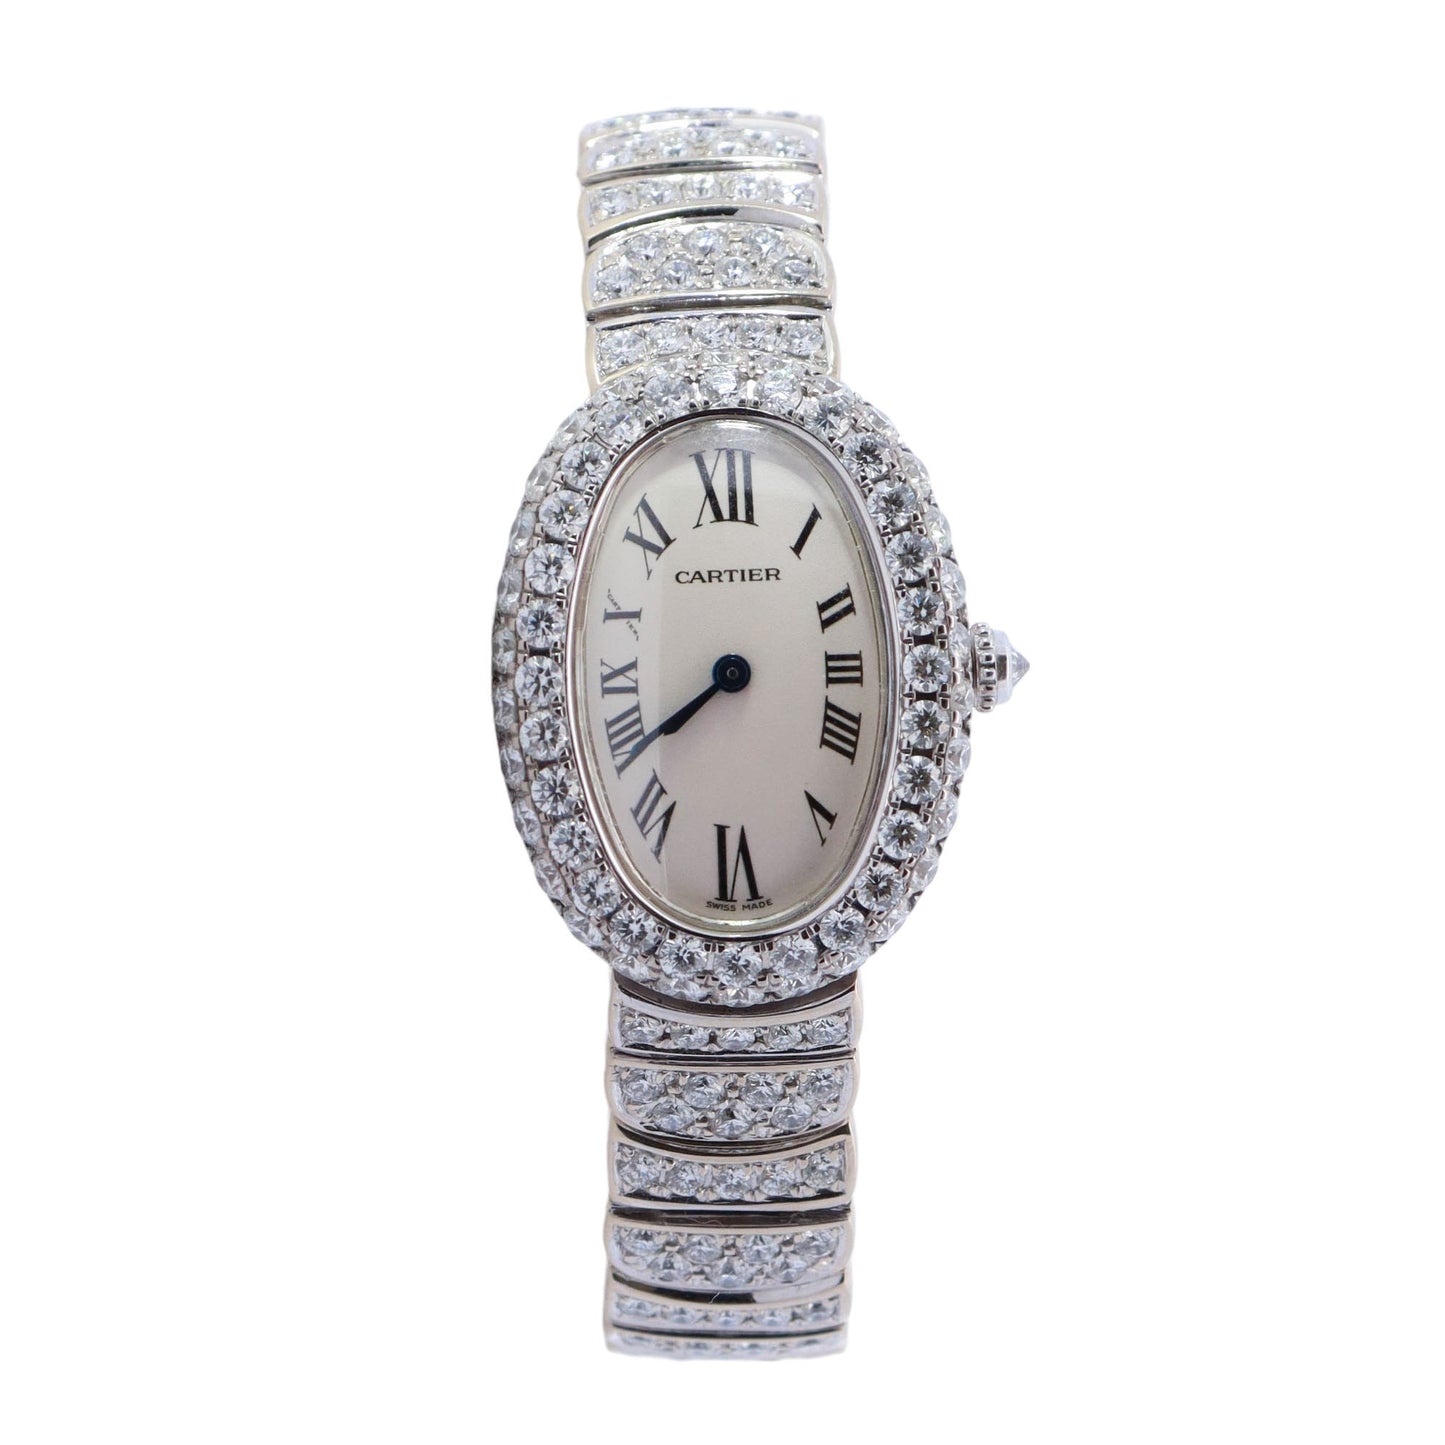 Cartier Baignoire White Gold 26mm White Roman Dial Watch Reference# 1955 - Happy Jewelers Fine Jewelry Lifetime Warranty